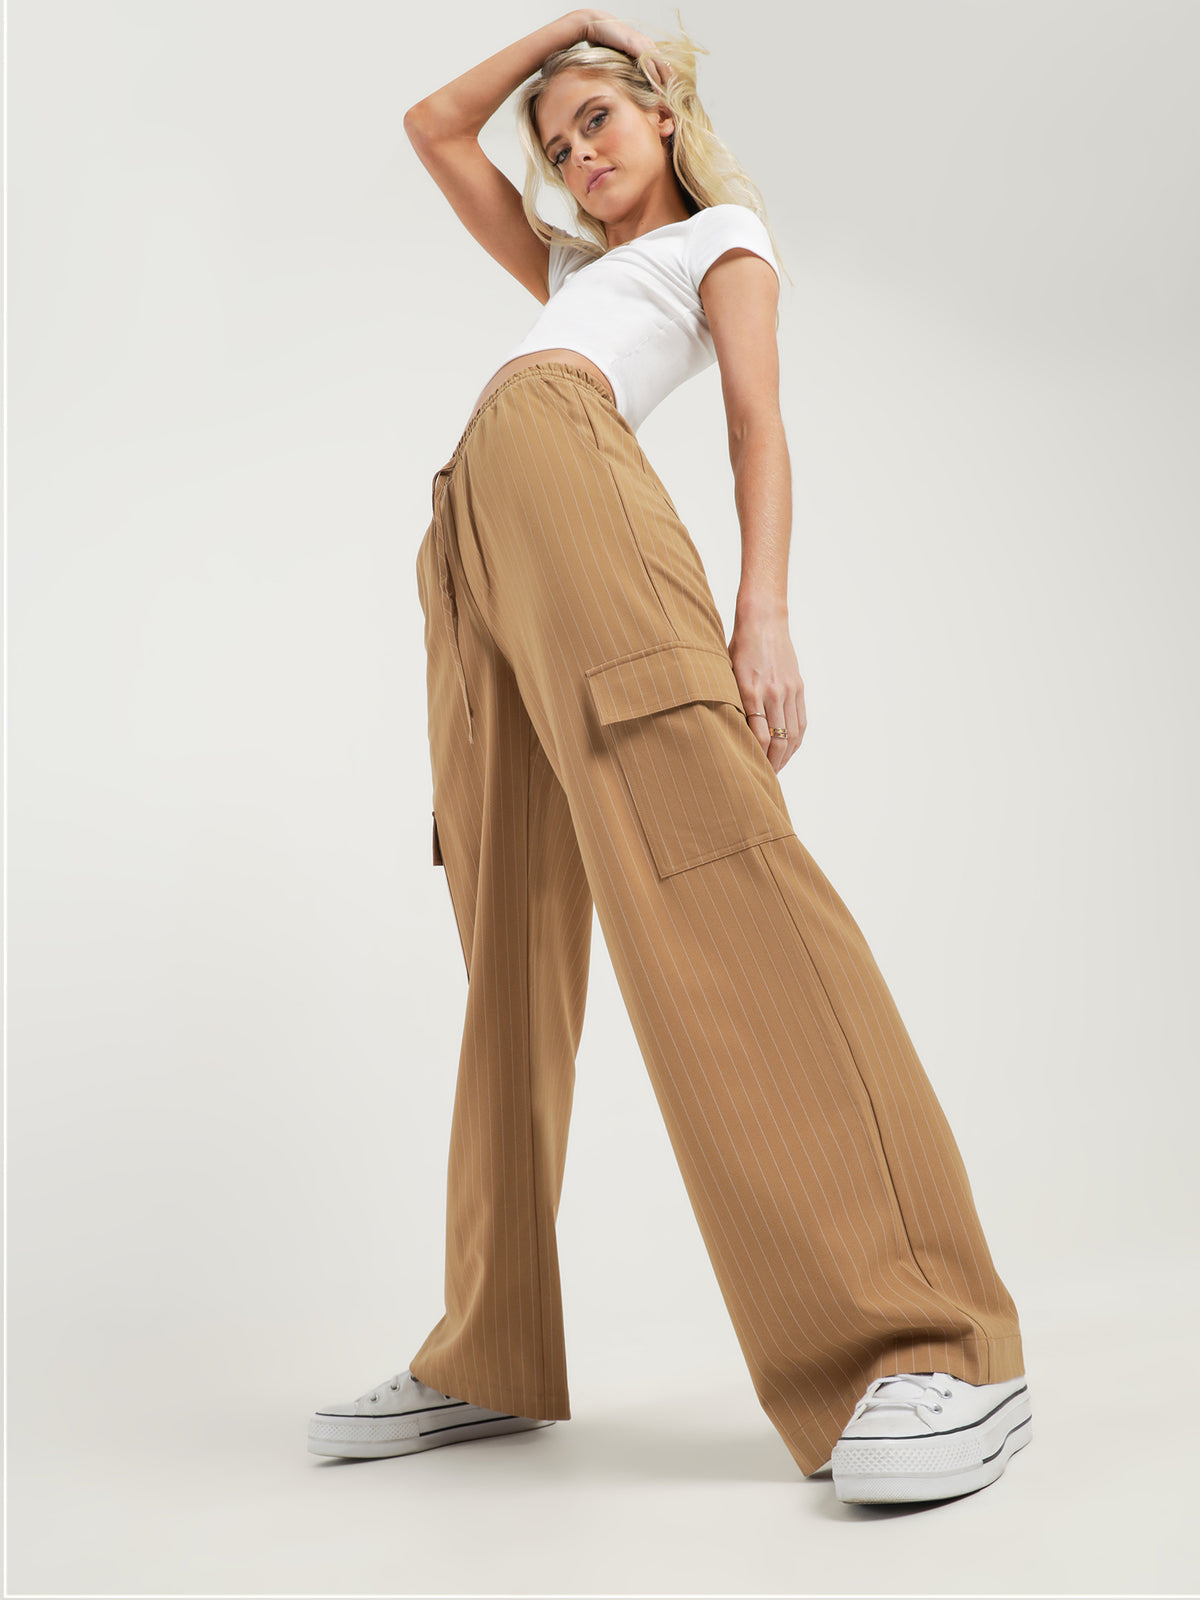 Outlaw Drawstring Cargo Pants in Sand Brown Pinstripe